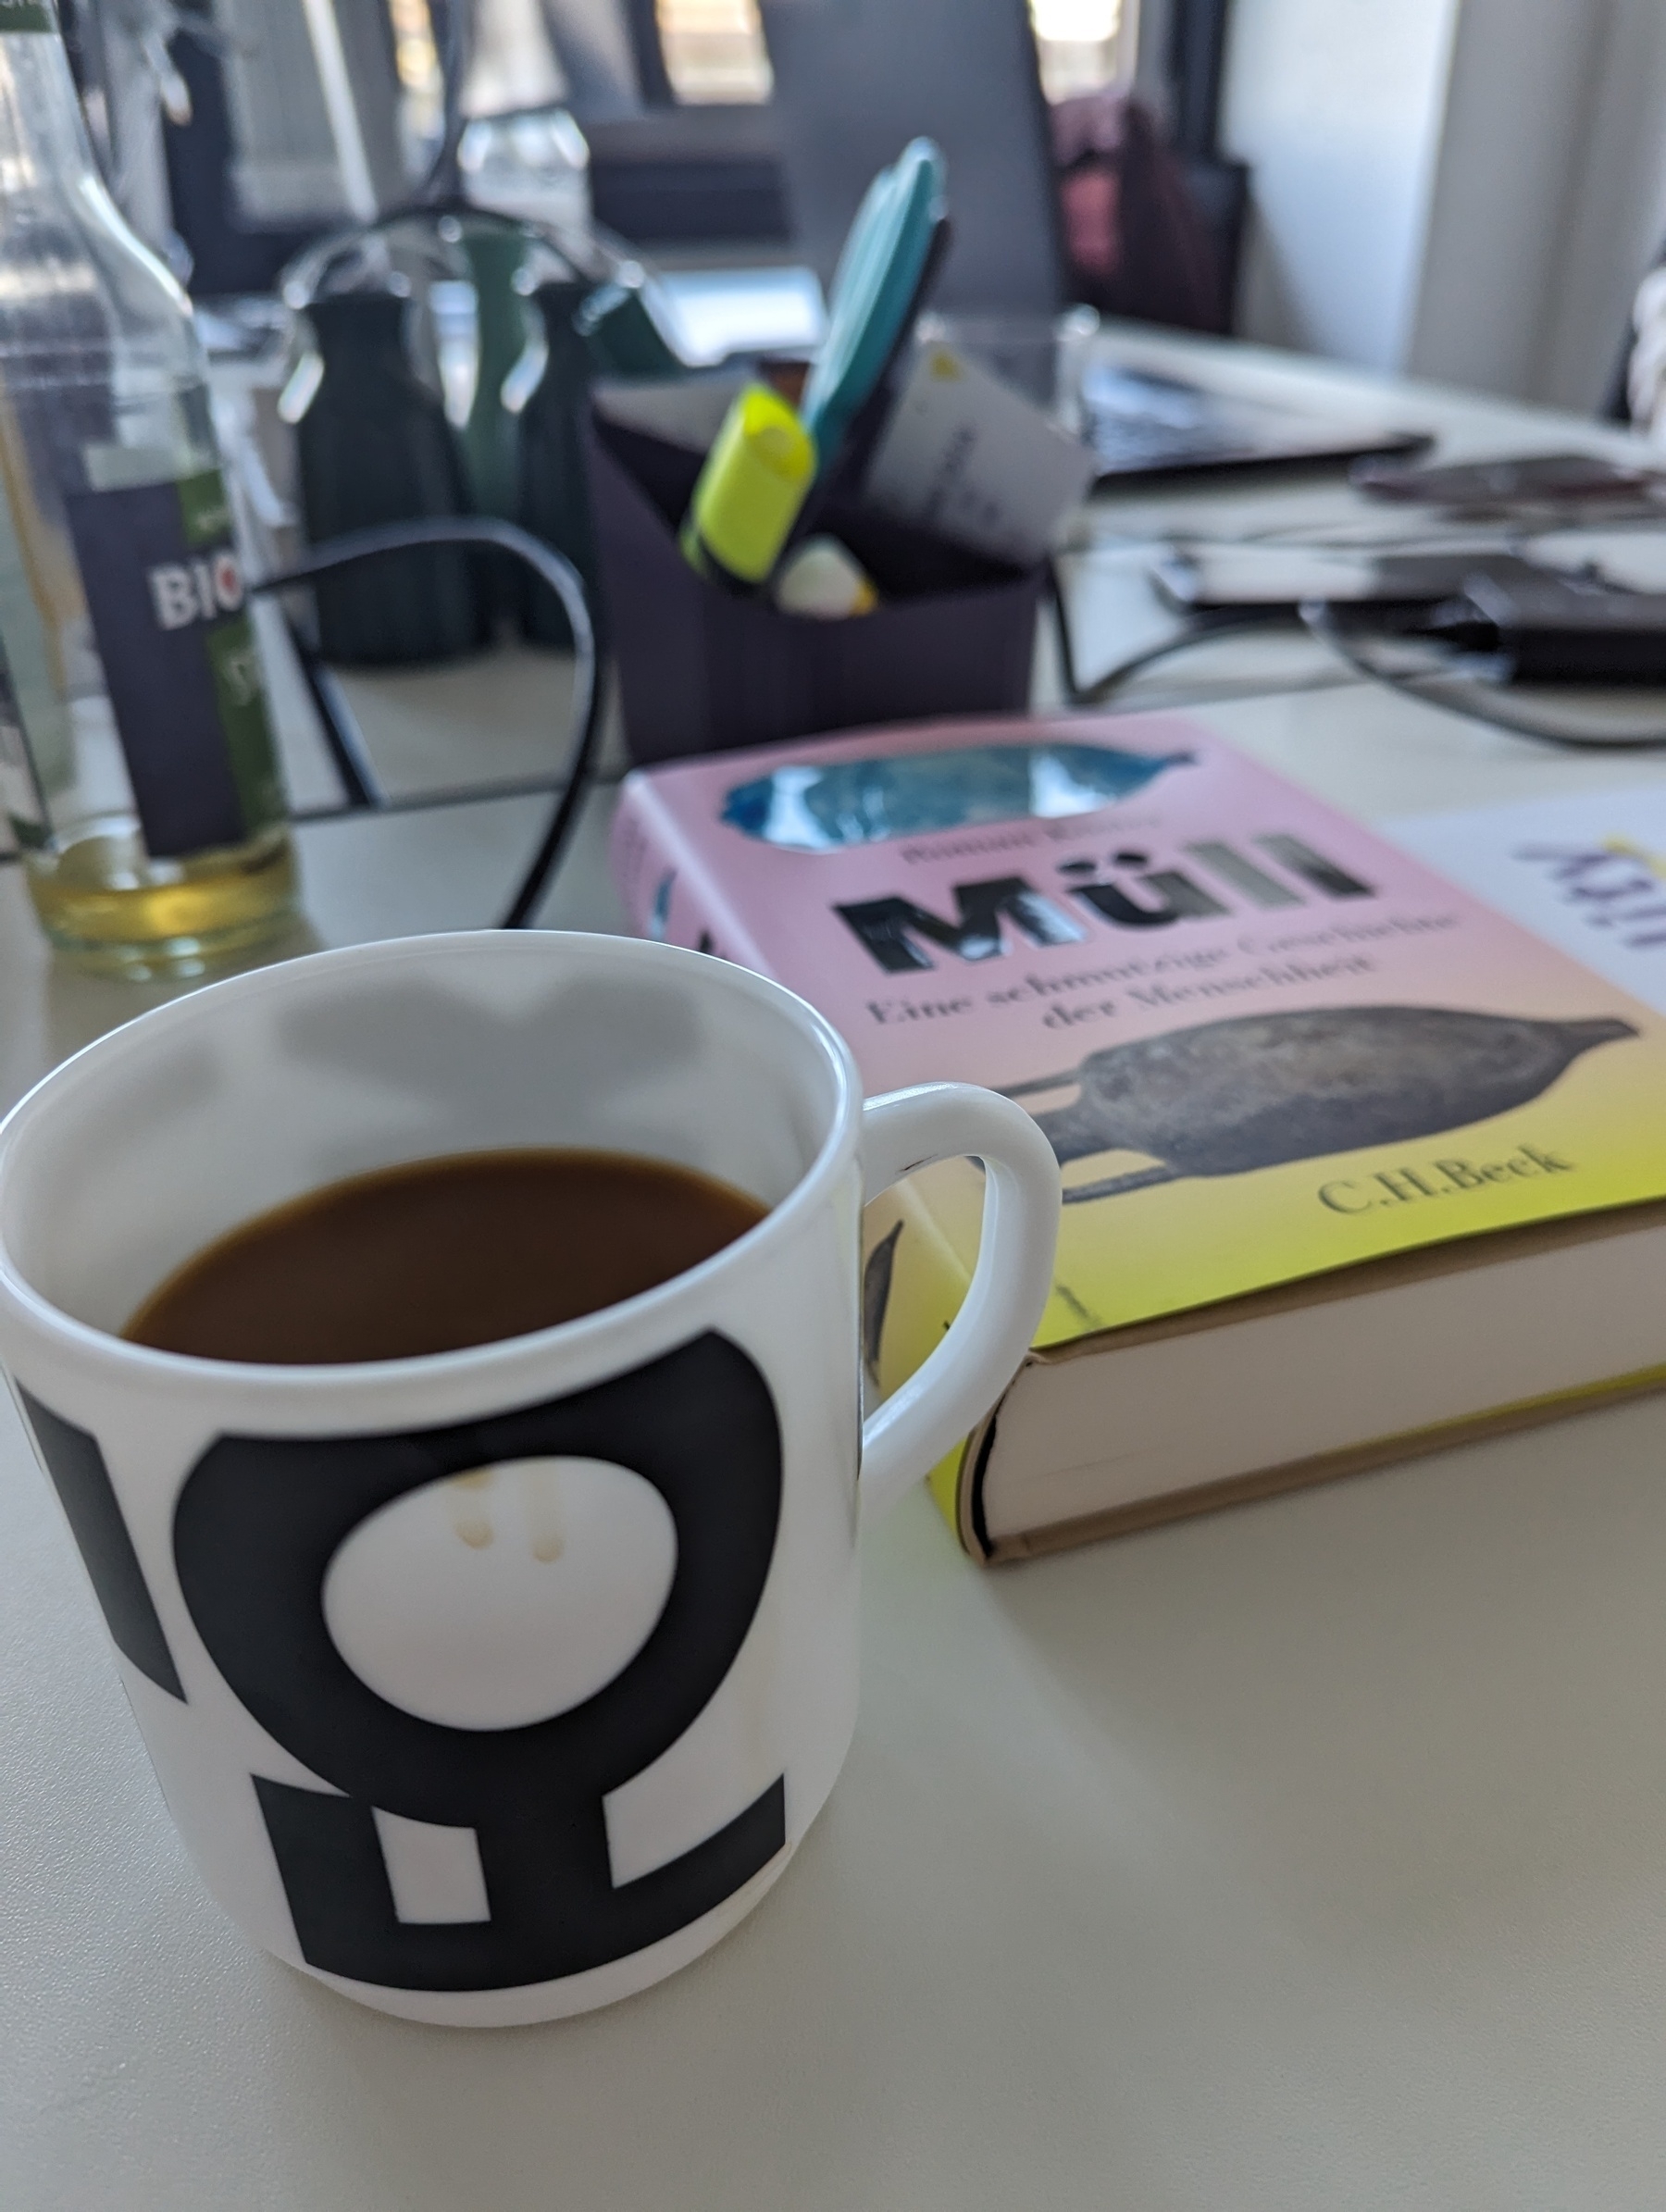 Snapshot from a desk. You see a black and white mug with coffee in there. Next to it is a colourful book cover boasting "Müll" aka waste.